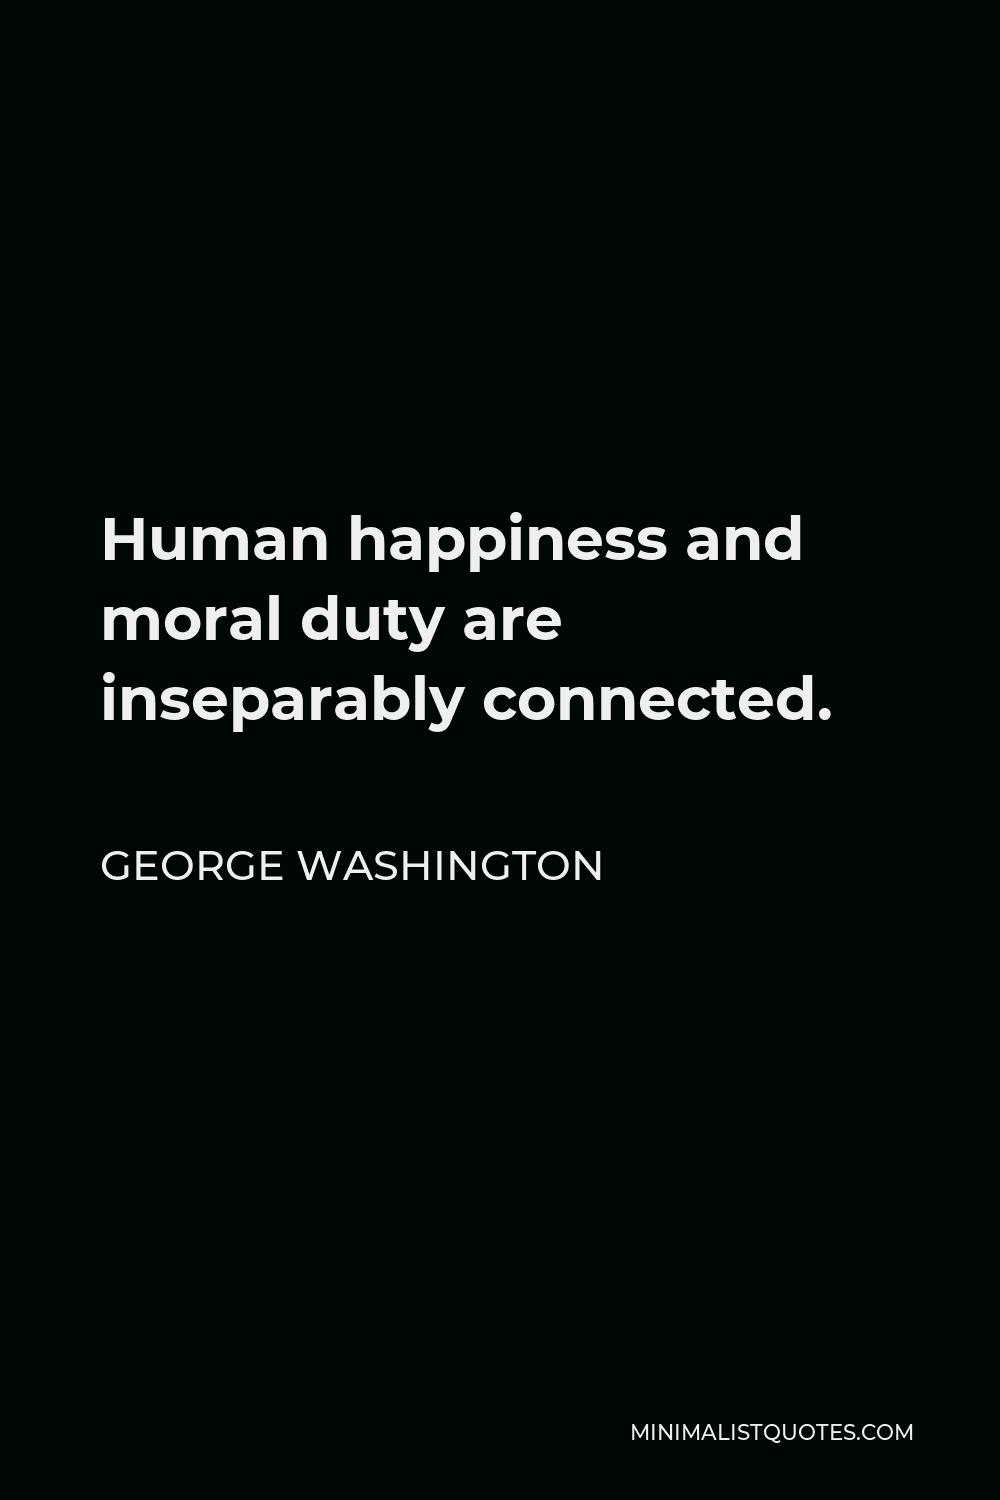 George Washington Quote - Human happiness and moral duty are inseparably connected.